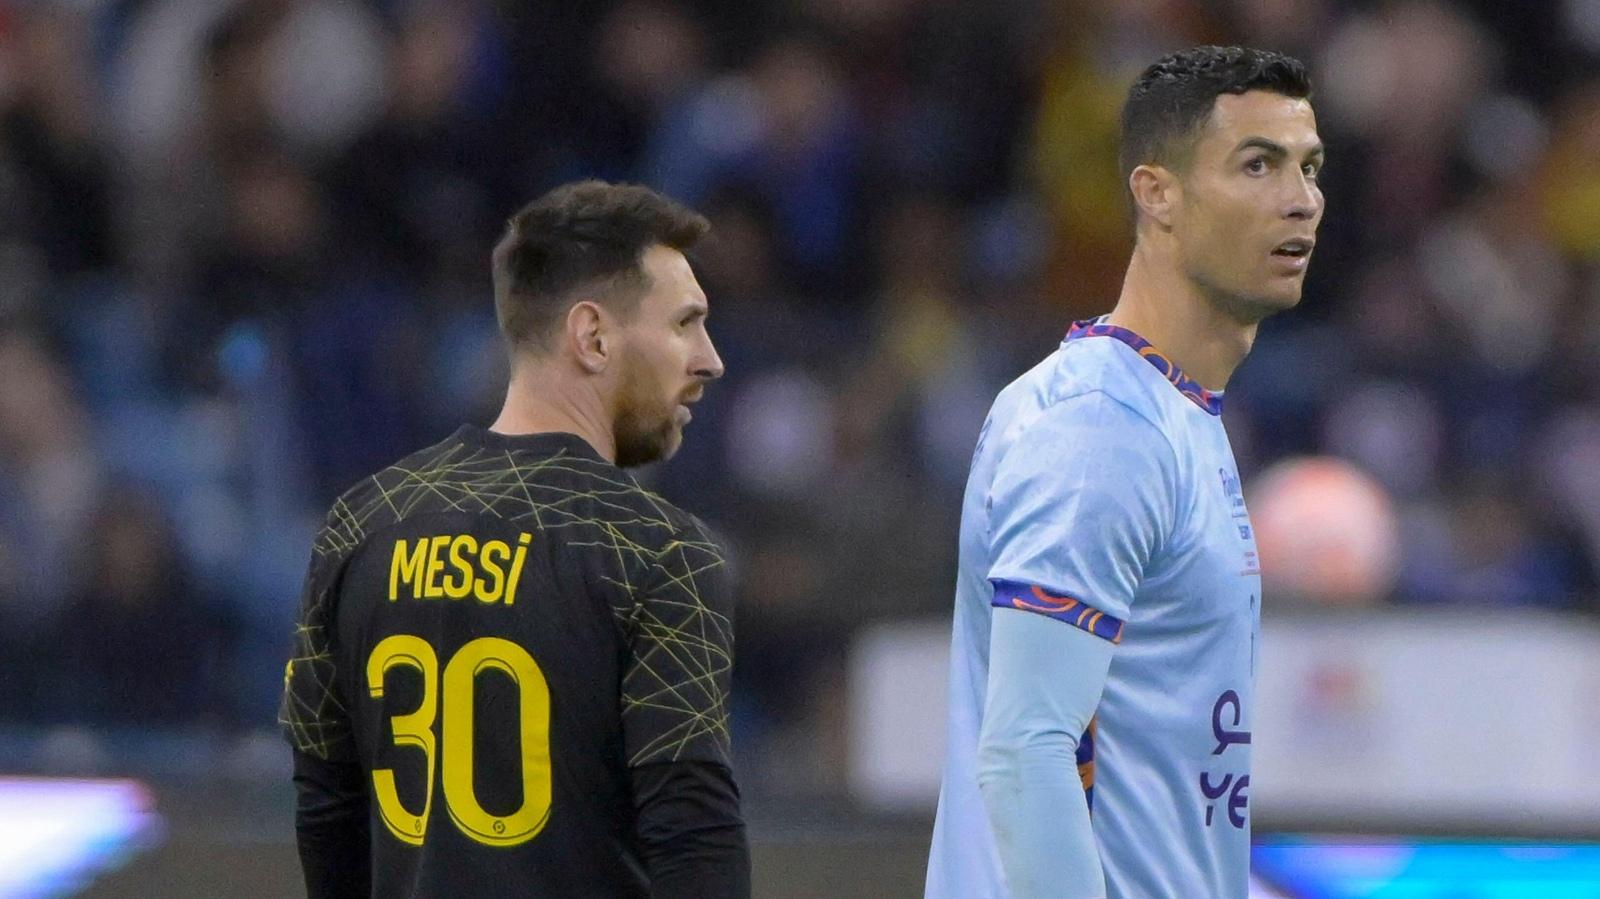 Saudi League Planning for Messi to join Ronaldo if He Leaves Paris